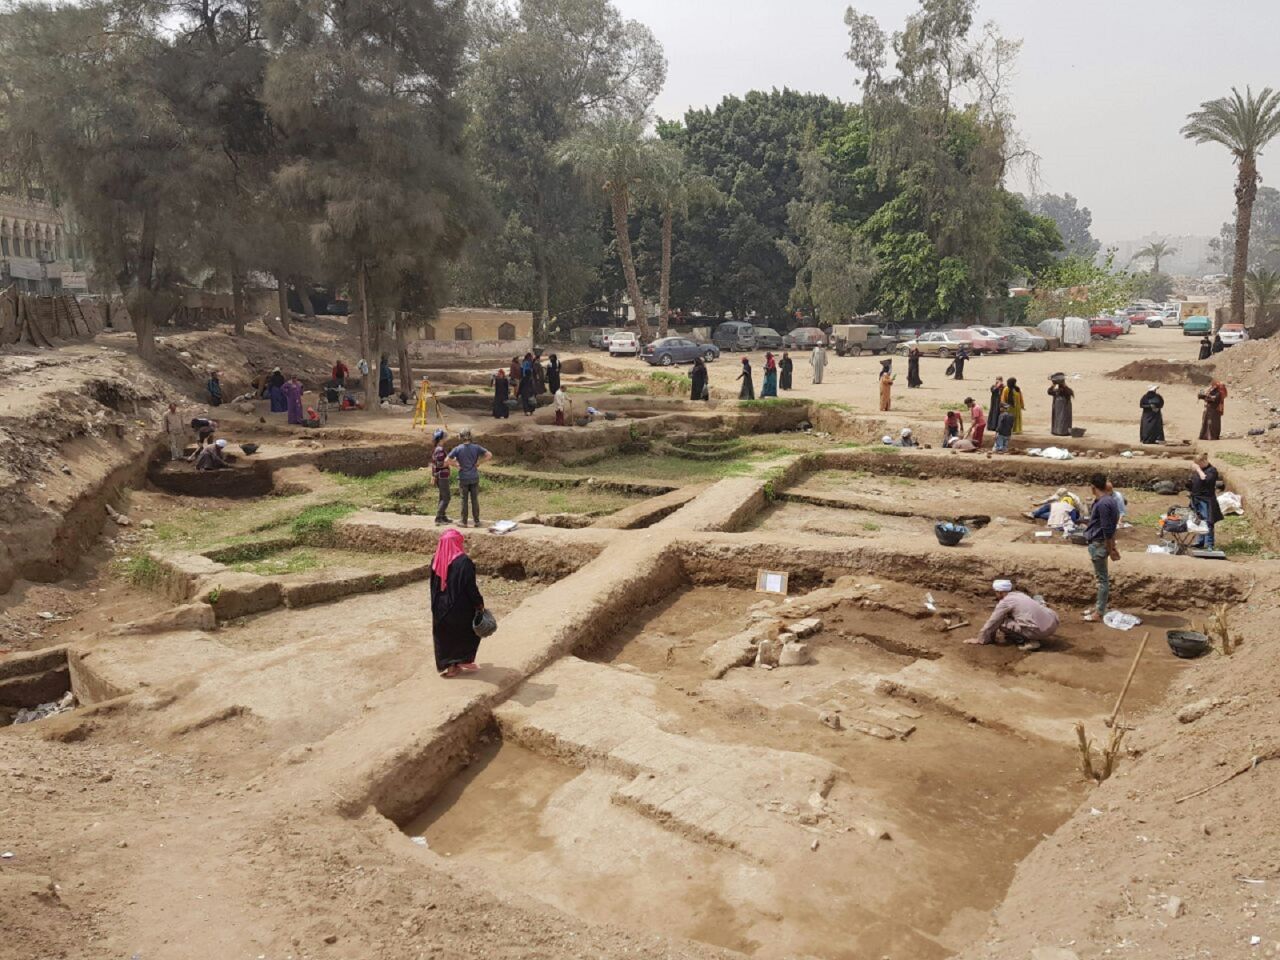 The ancient city of Heliopolis is now located in Matariya, a northeastern suburb of Cairo. The area has suffered <a href="https://edition.cnn.com/2014/11/28/world/meast/egypt-violence/index.html">political troubles</a> and tensions since the 2011 revolution.